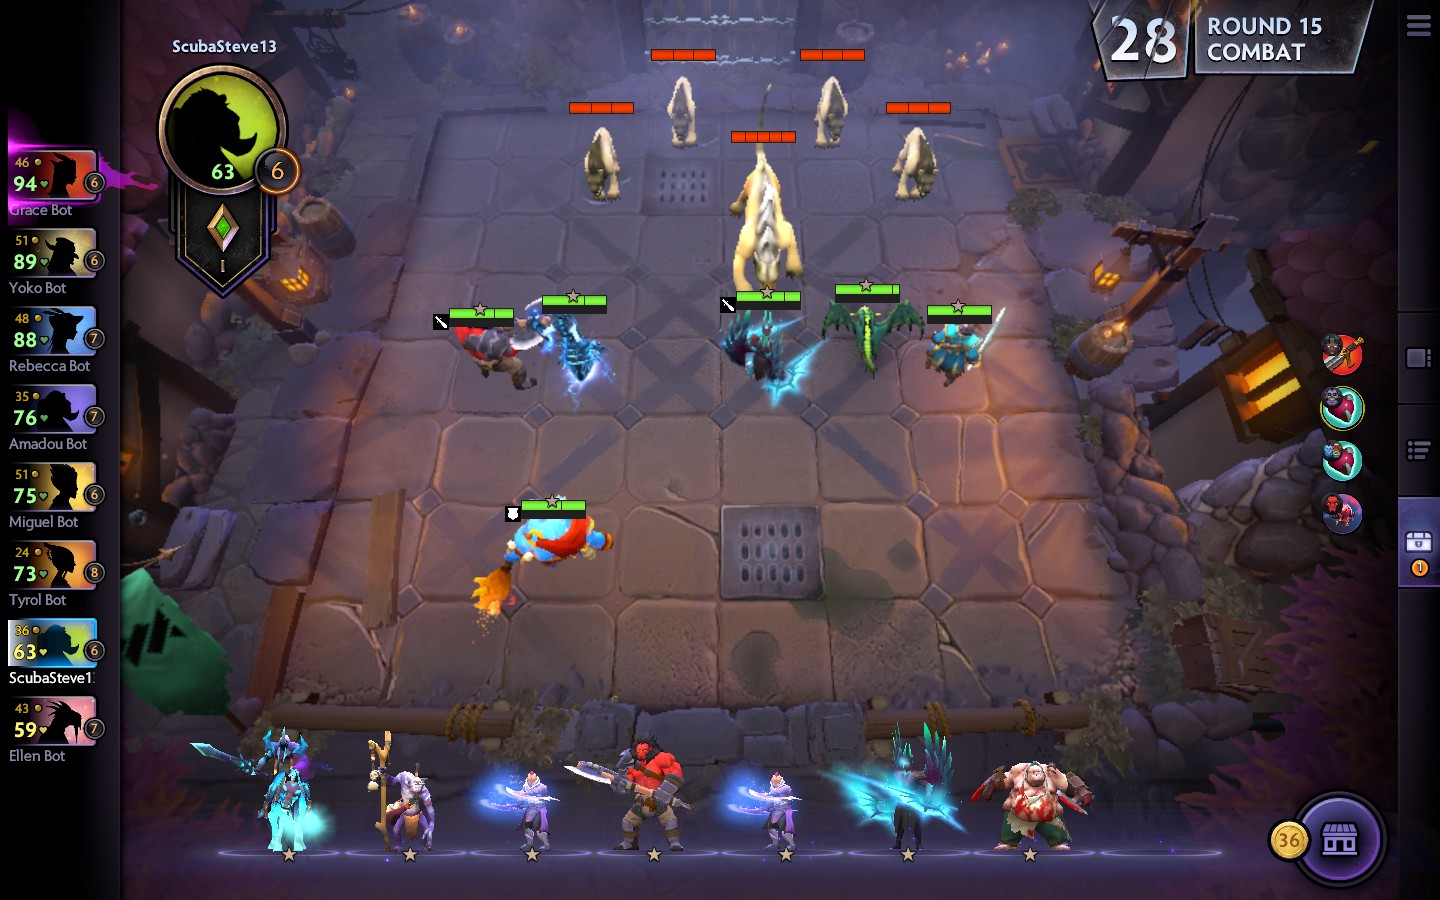 Auto Chess is getting a MOBA that looks like a Dota 2 ripoff 